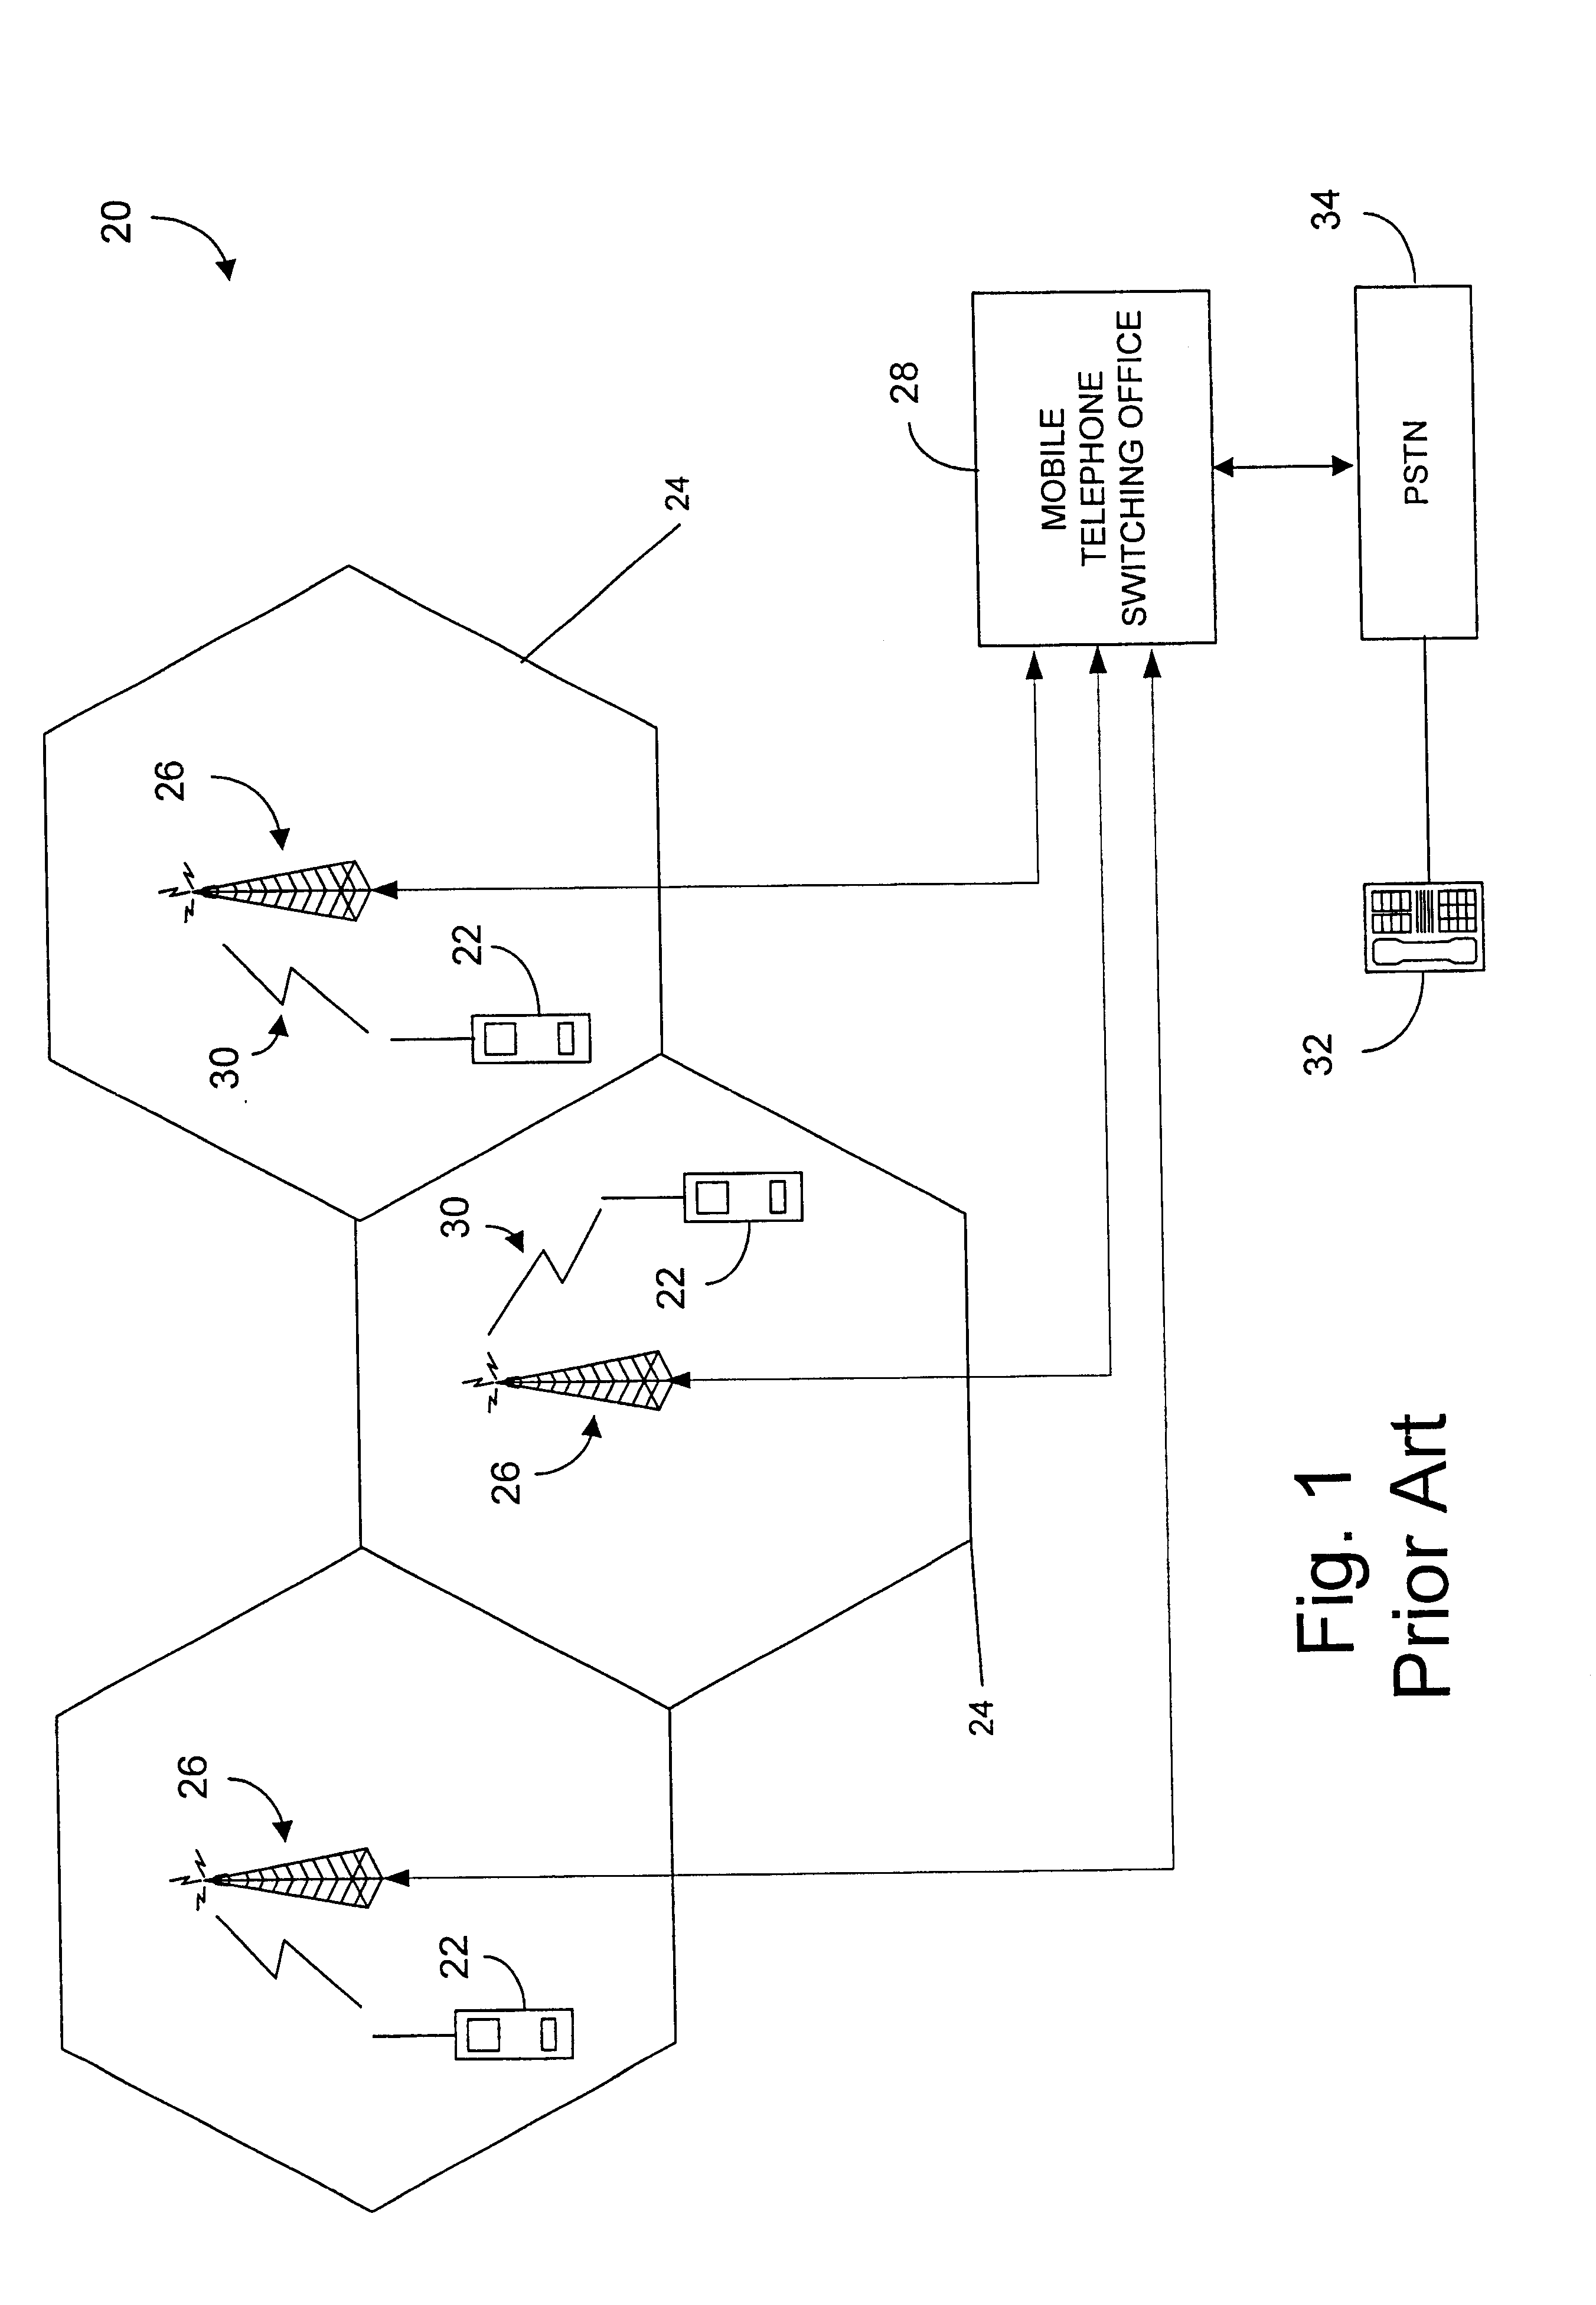 Methods for wirelessly communicating time division multiple access (TDMA) data using adaptive multiplexing and coding